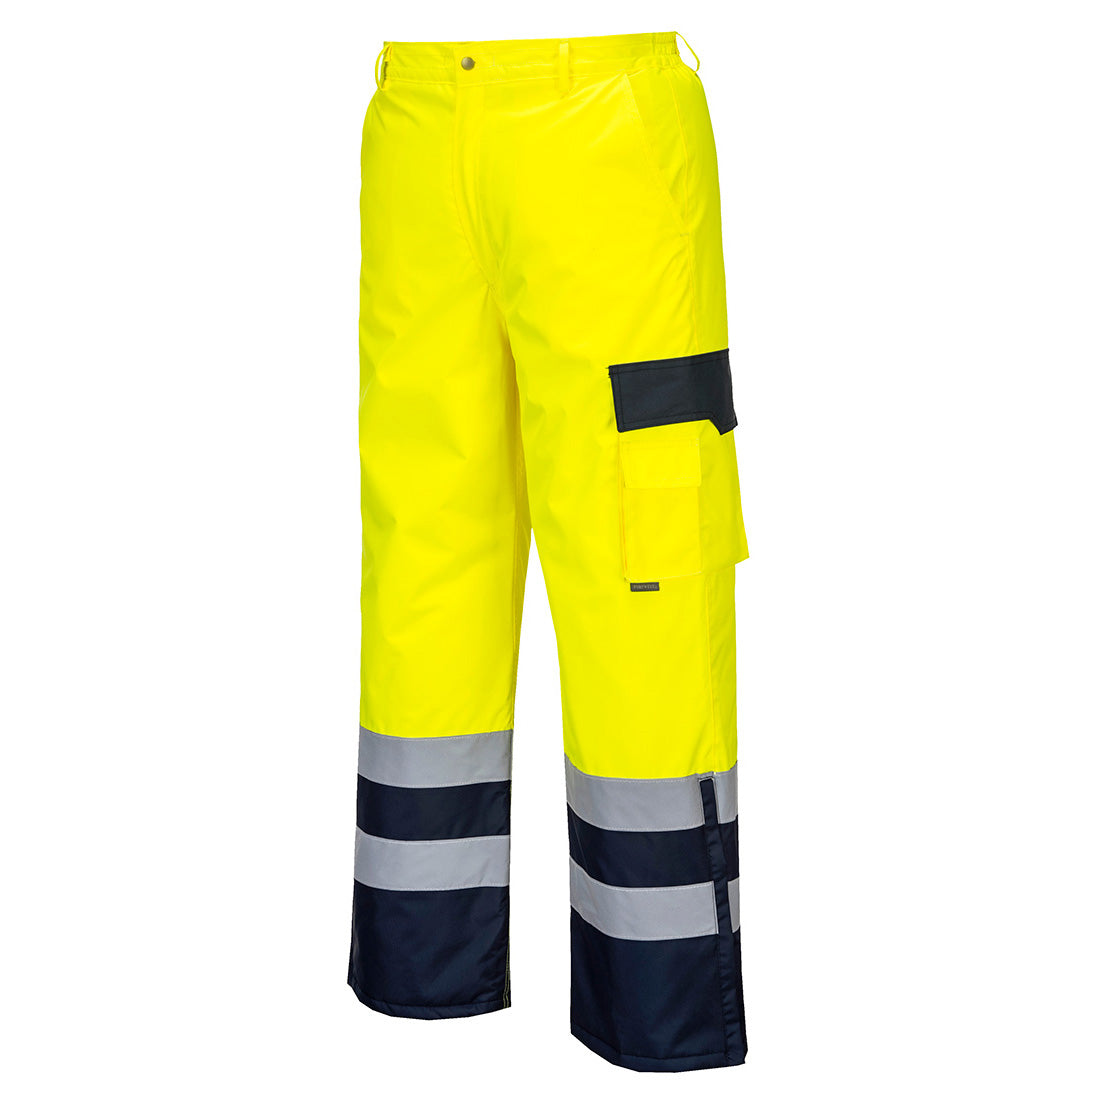 Portwest S686 Hi Vis Contrast Trousers - Lined 1#colour_yellow-navy 2#colour_yellow-navy